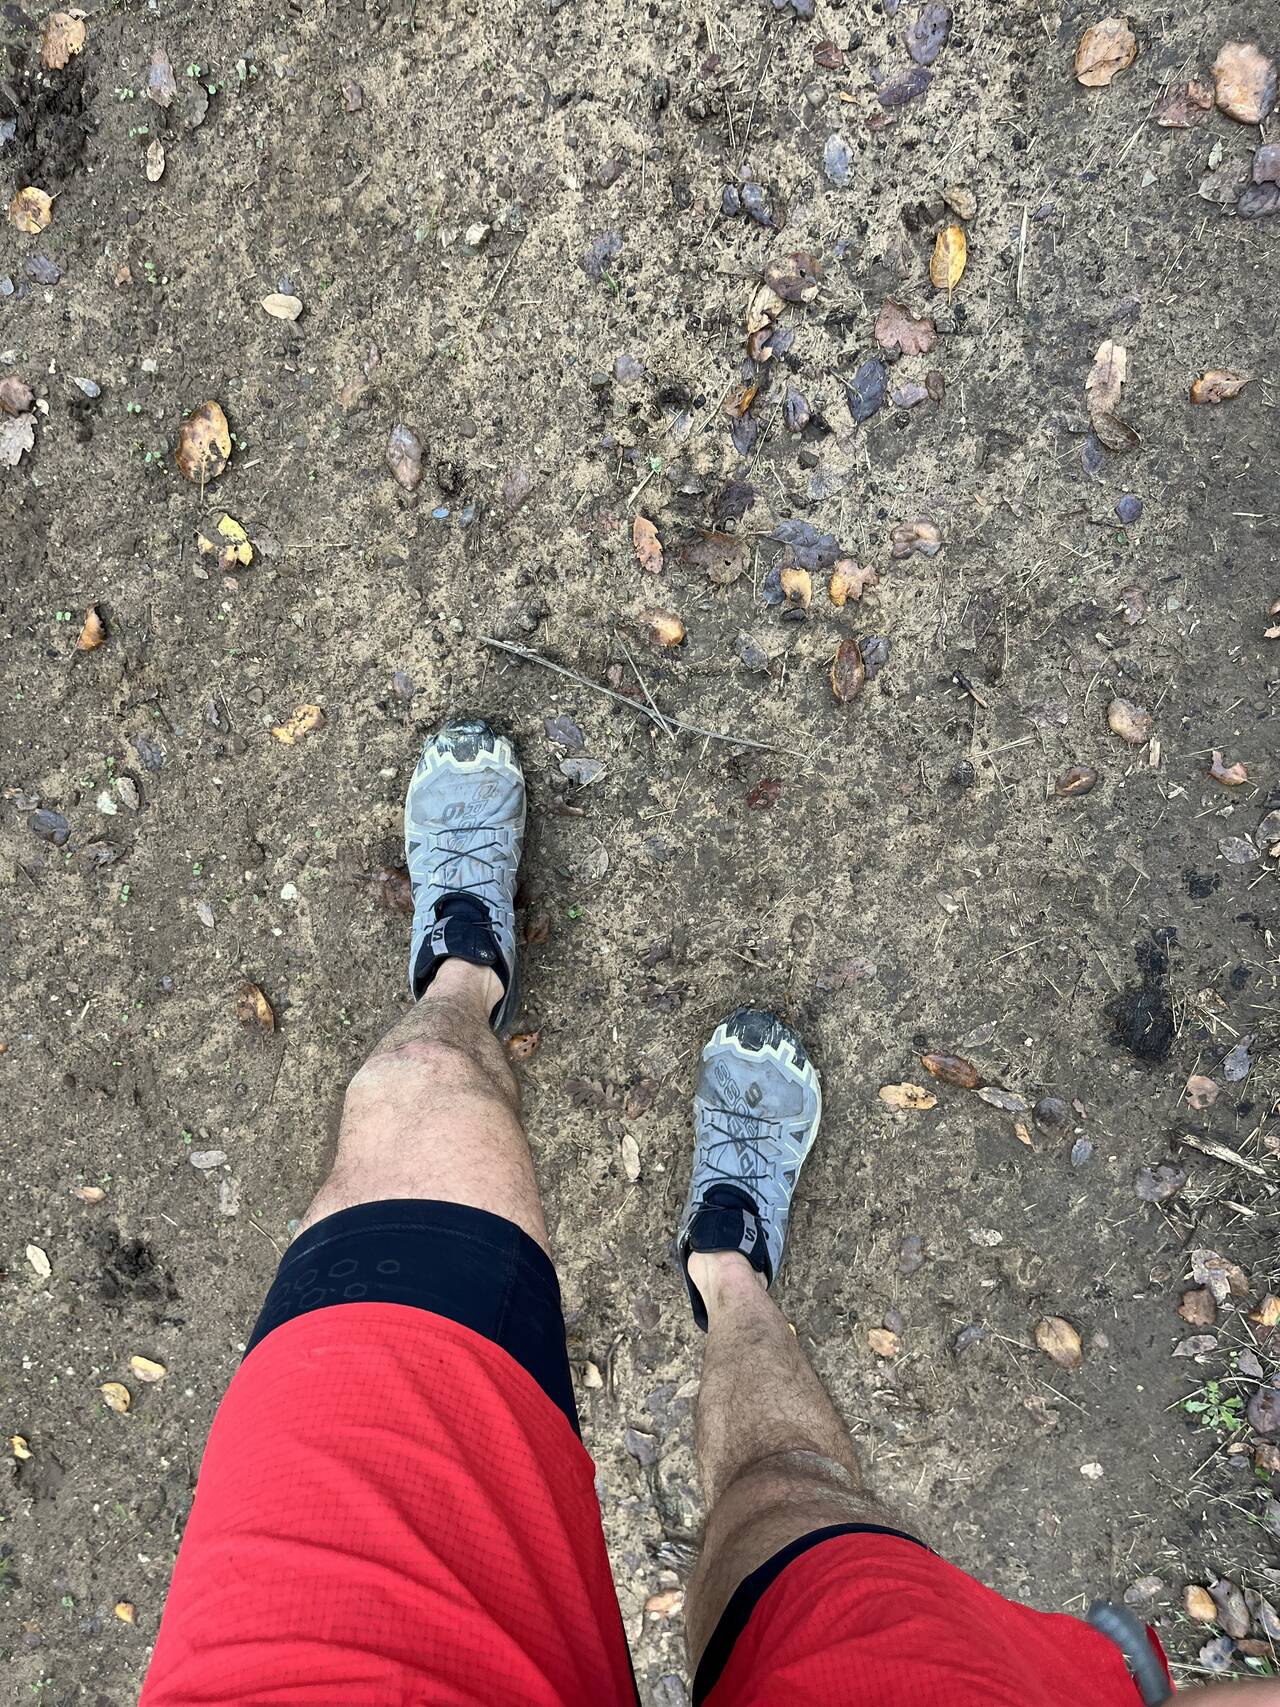 A standard downward-facing photo of legs and shoes on a dry path